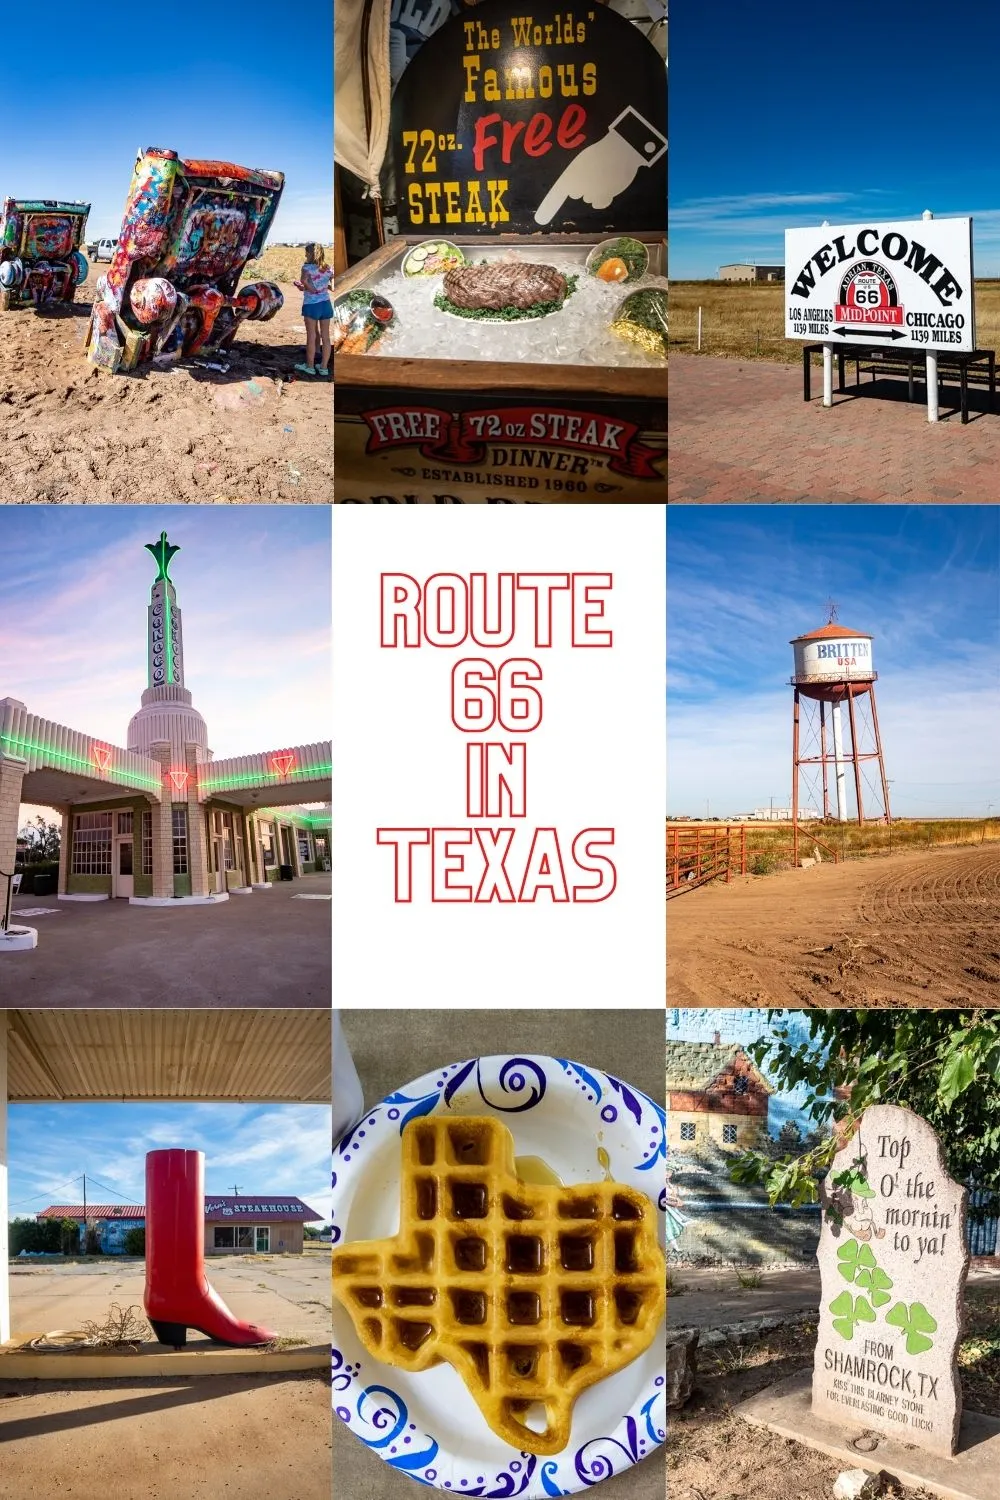 If you’re looking for classic roadside attractions, iconic diners, informative museums, and nostalgic nods to the past, a road trip on Route 66 in Texas offers everything you’re looking for. Pull over at any and all of the stops on this complete list of Texas Route 66 Attractions and start planning your road trip on the Mother Road today. #Route66 #Texas #Route66RoadTrip #TexasRoute66 #TexasRoute66RoadTrip #TexasRoadTrip #travel #RoadTrip